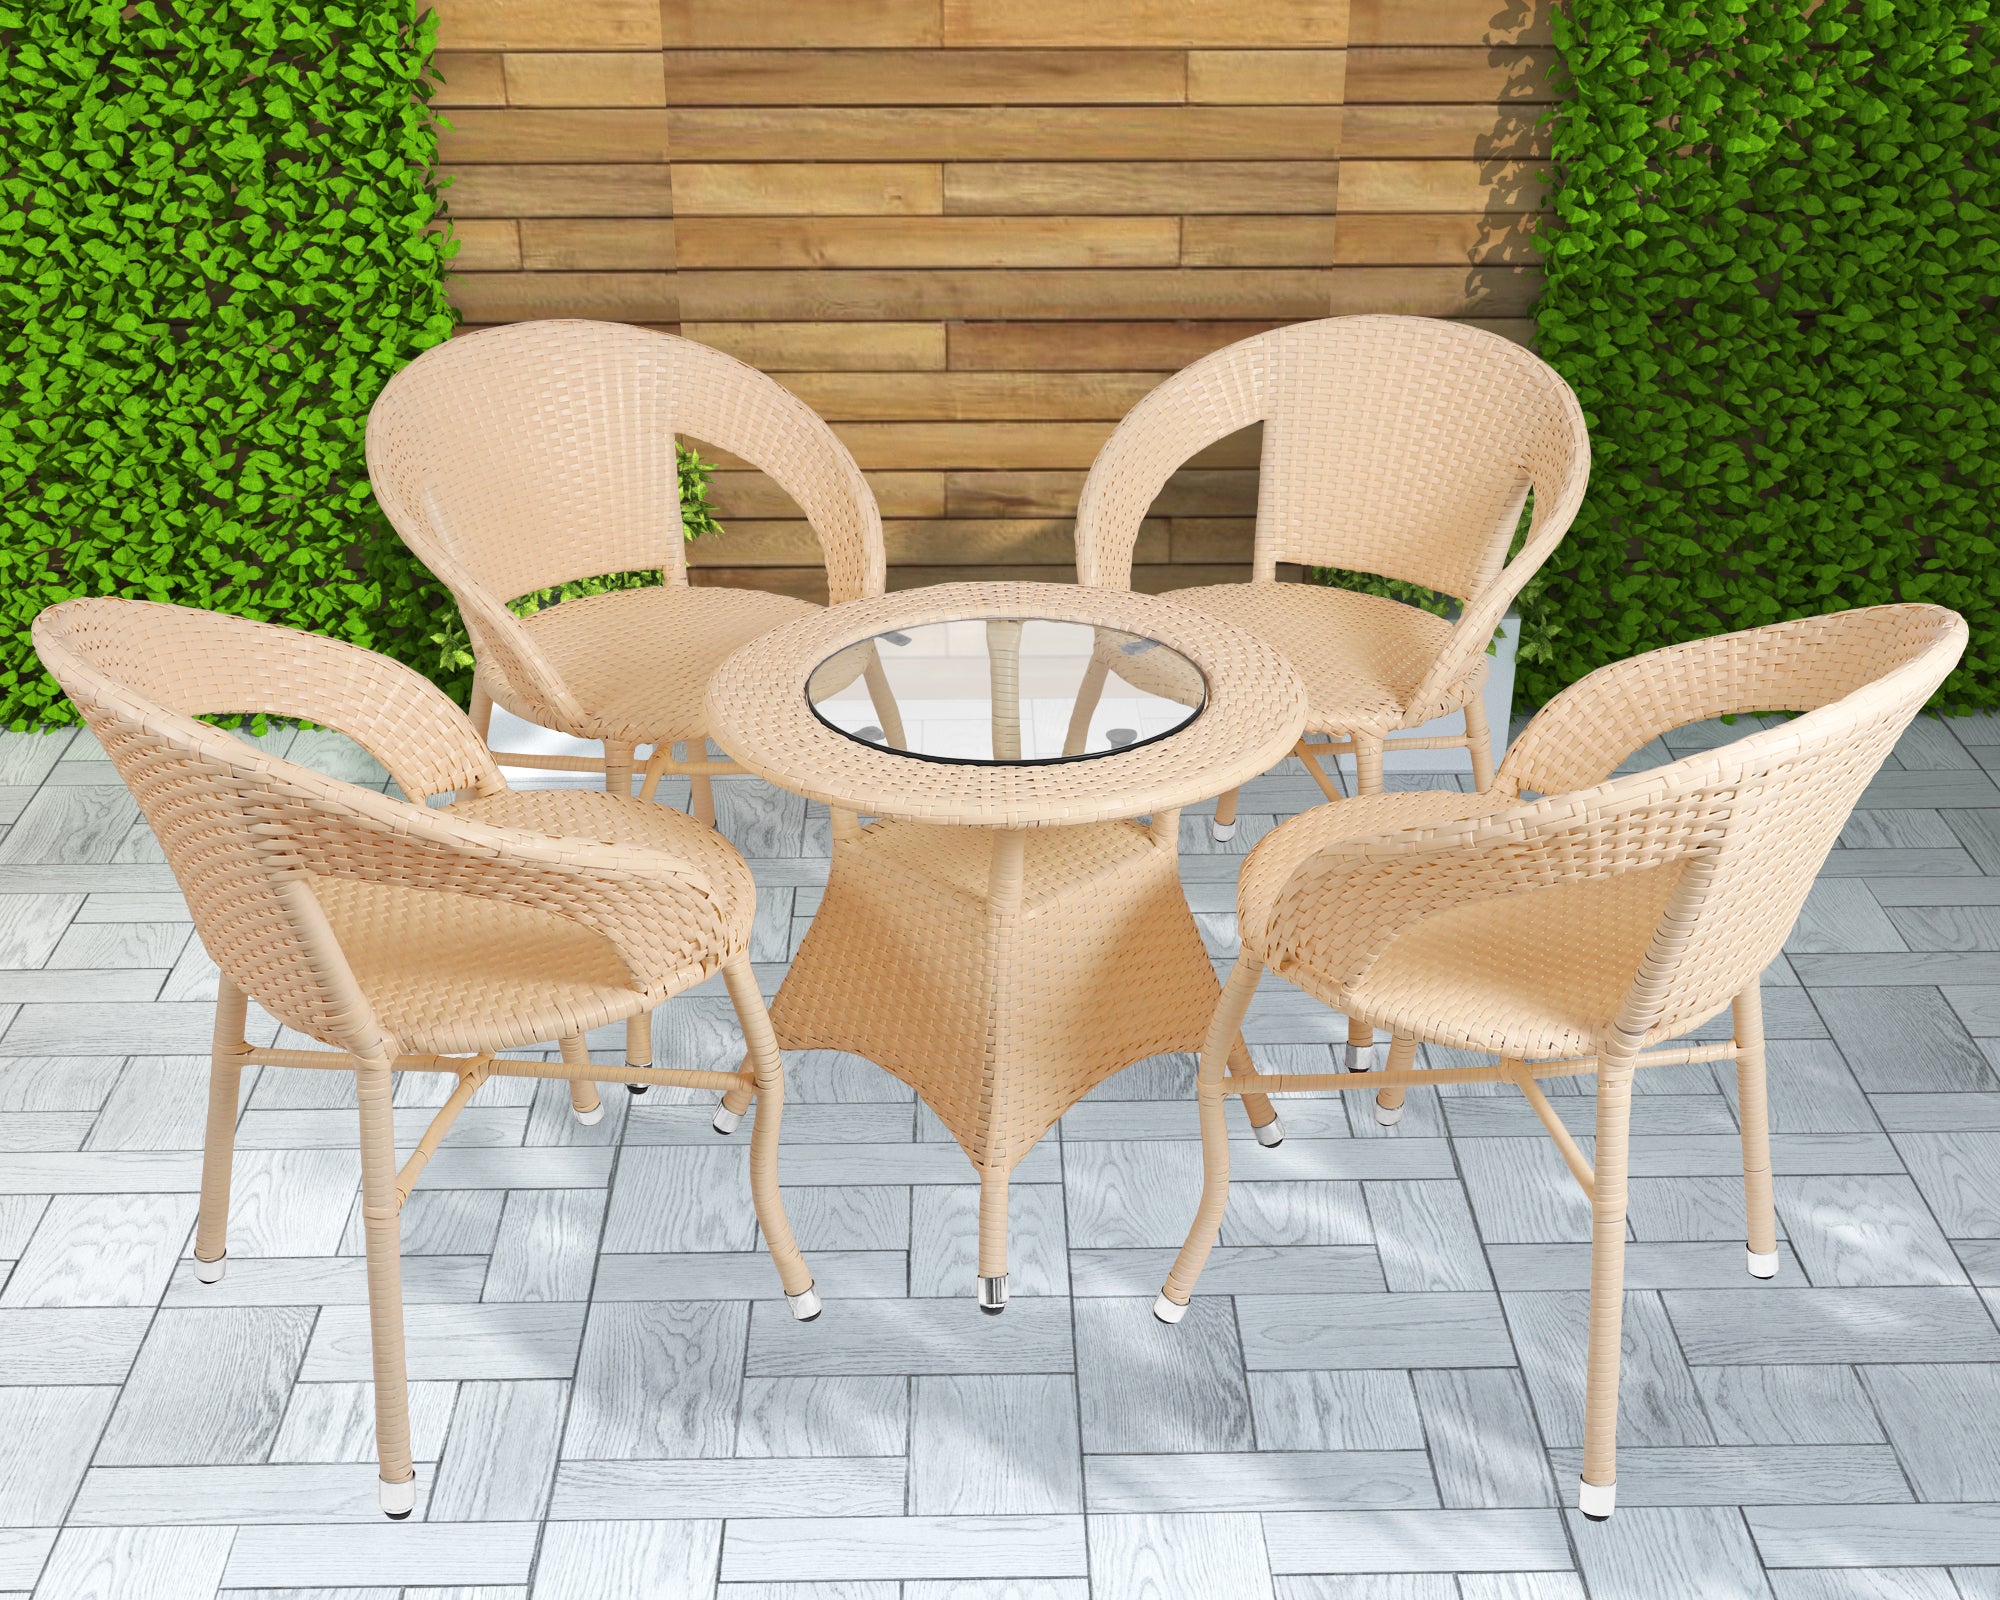 Raima Outdoor Patio Seating Set 4 Chairs and 1 Table Set (Cream)